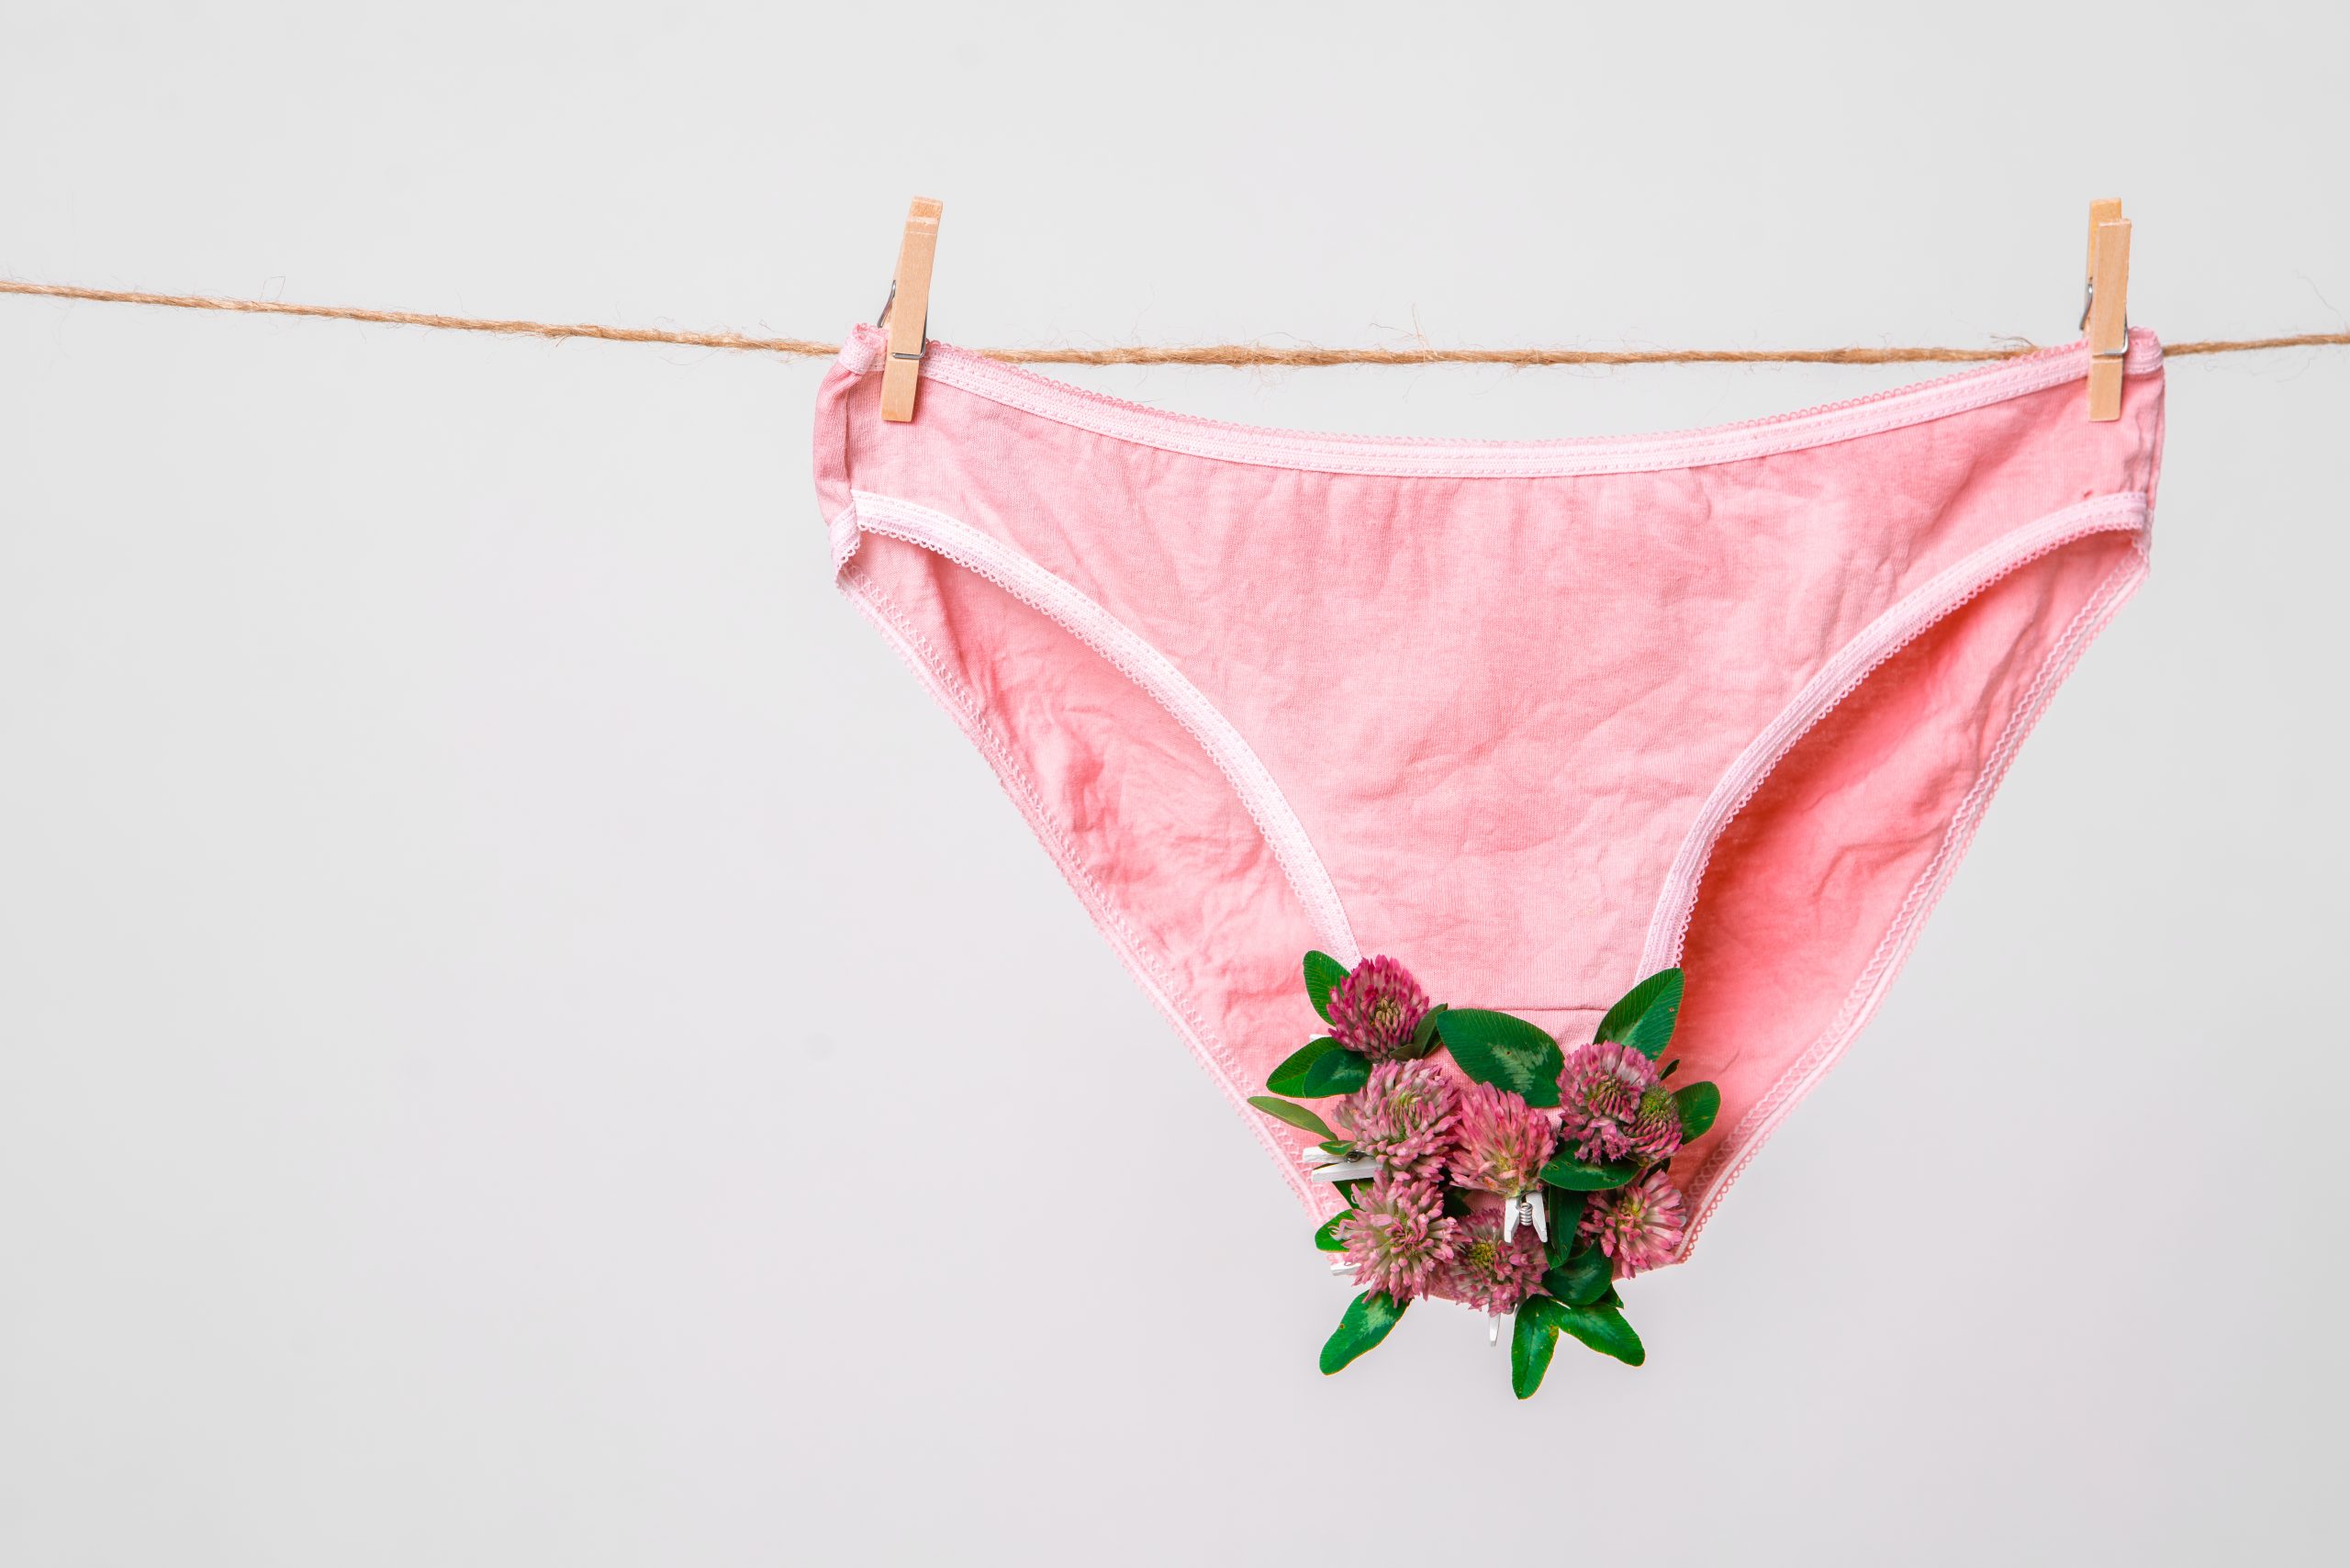 Why Does My Period Smell and What To Do About It?